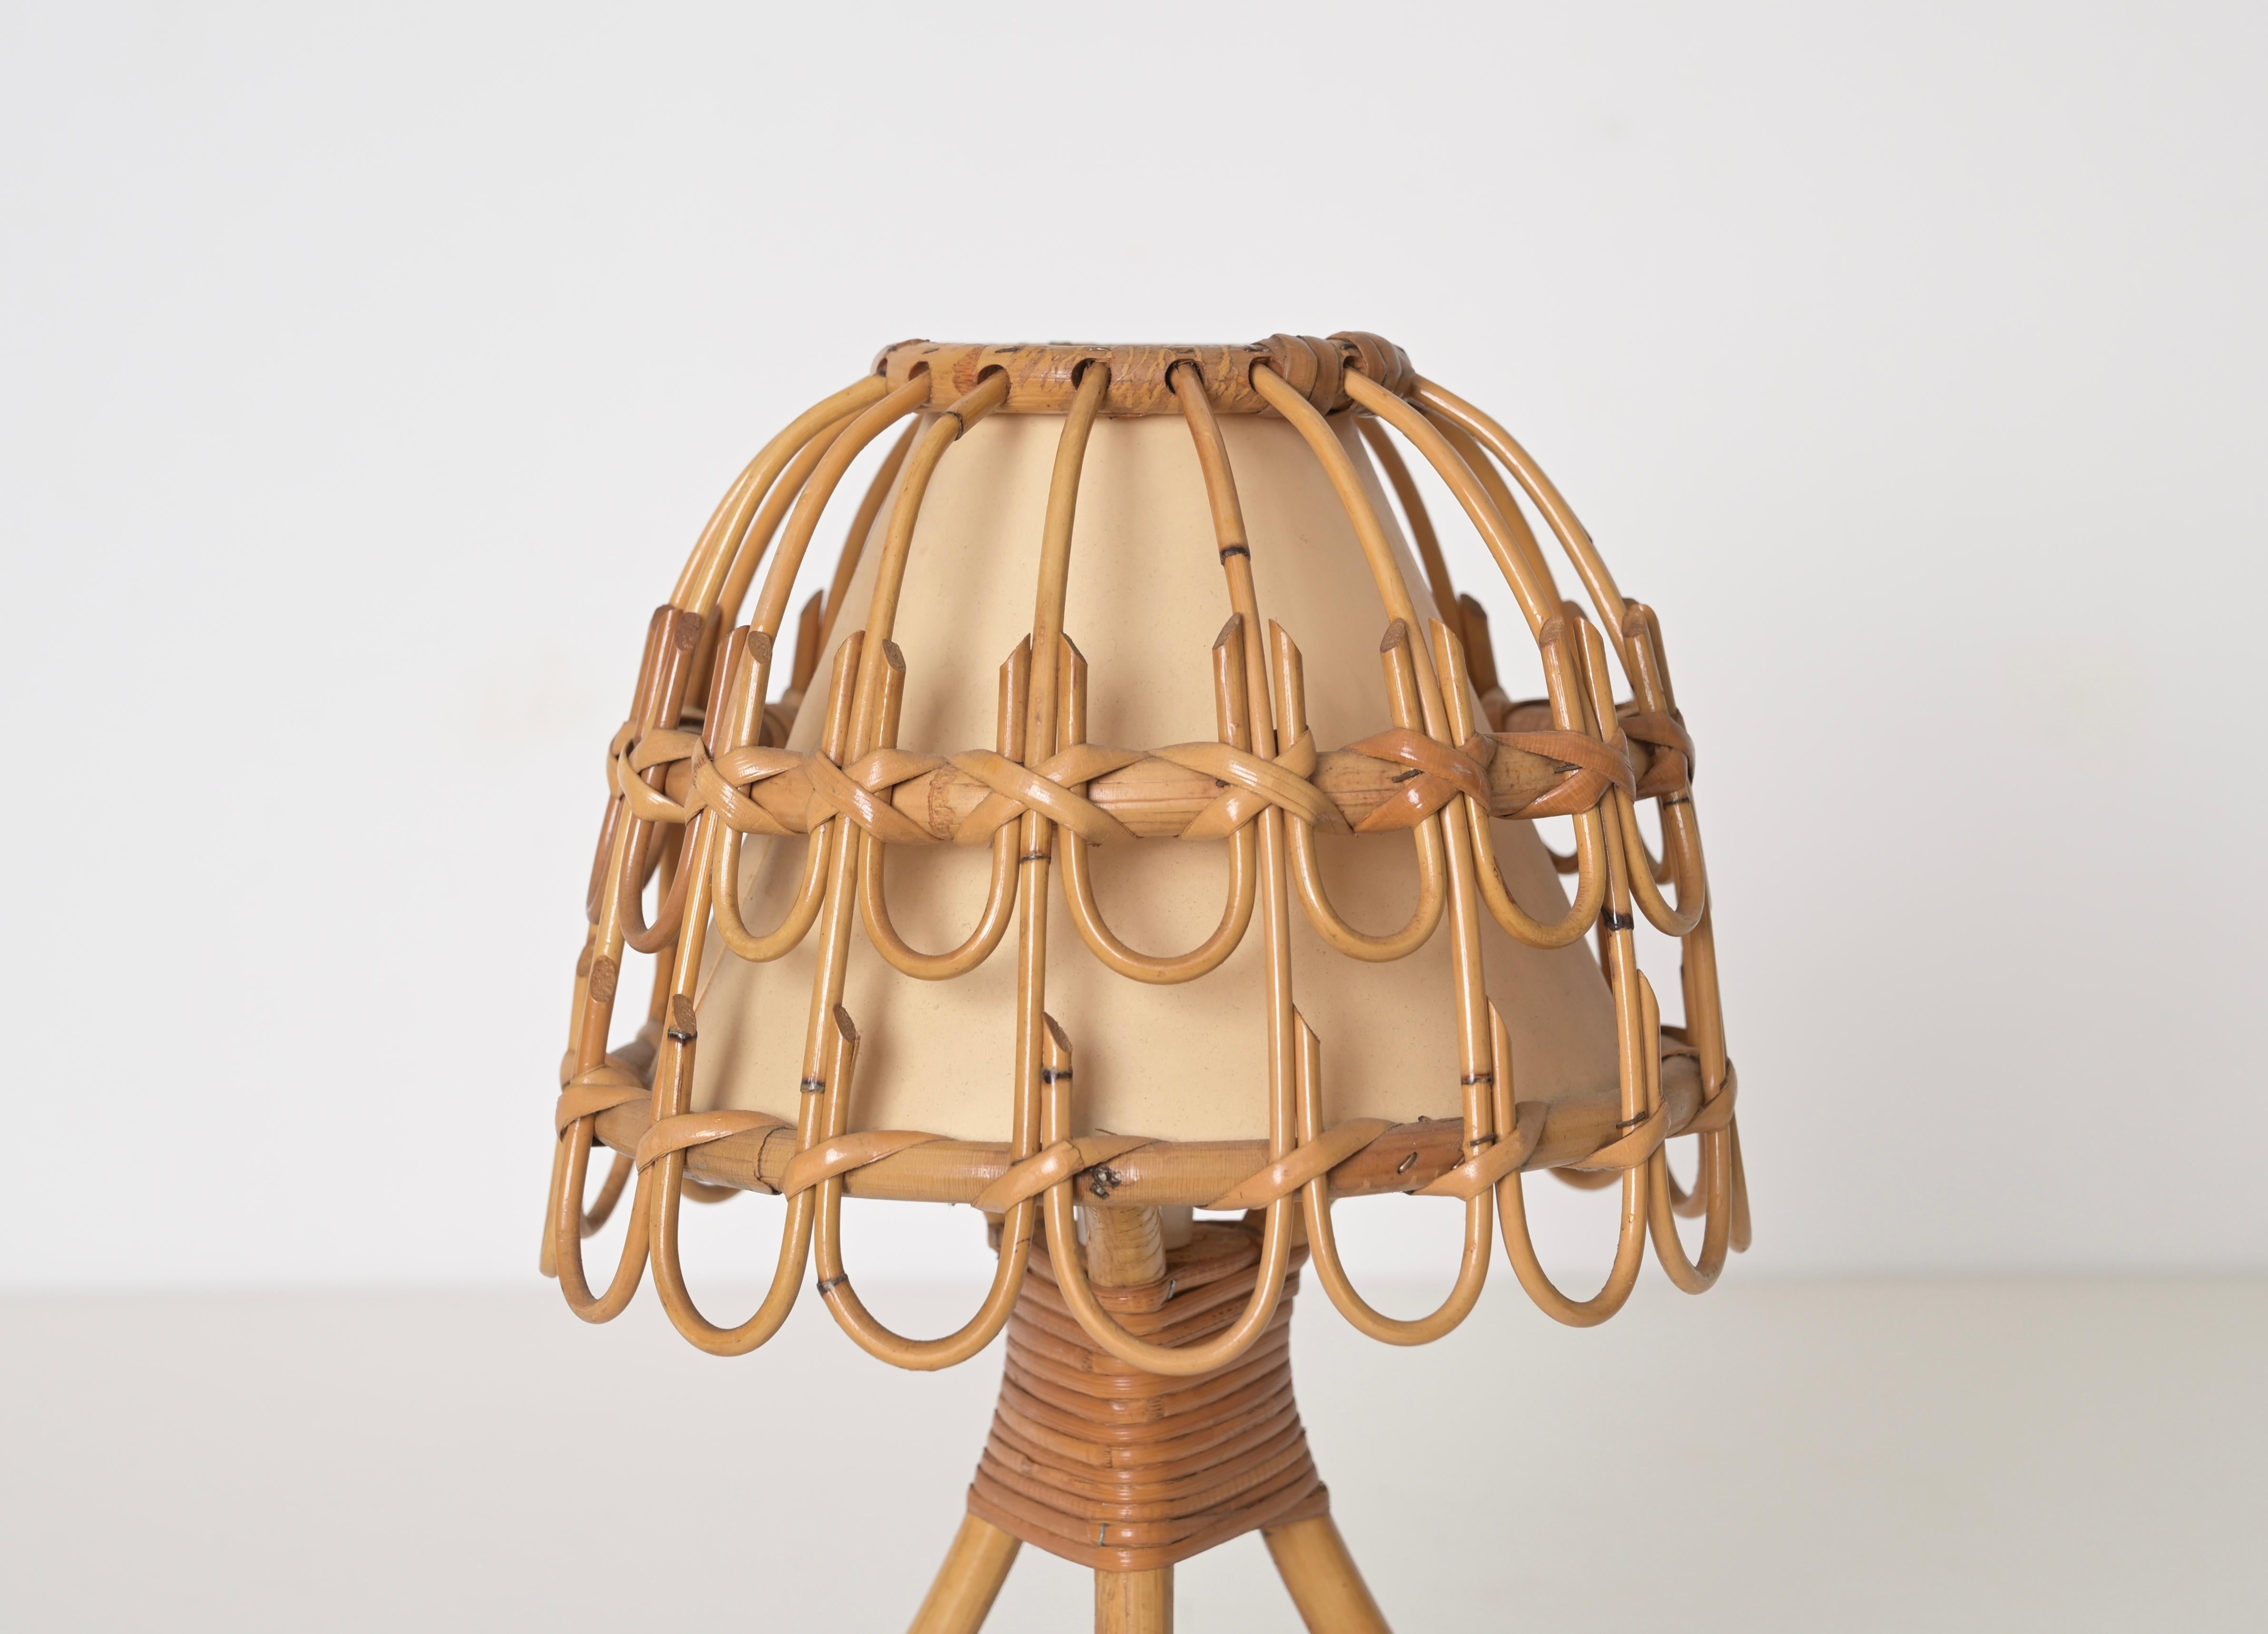 Pair of Midcentury Table Lamps in Rattan and Wicker, Louis Sognot, France, 1960s 1